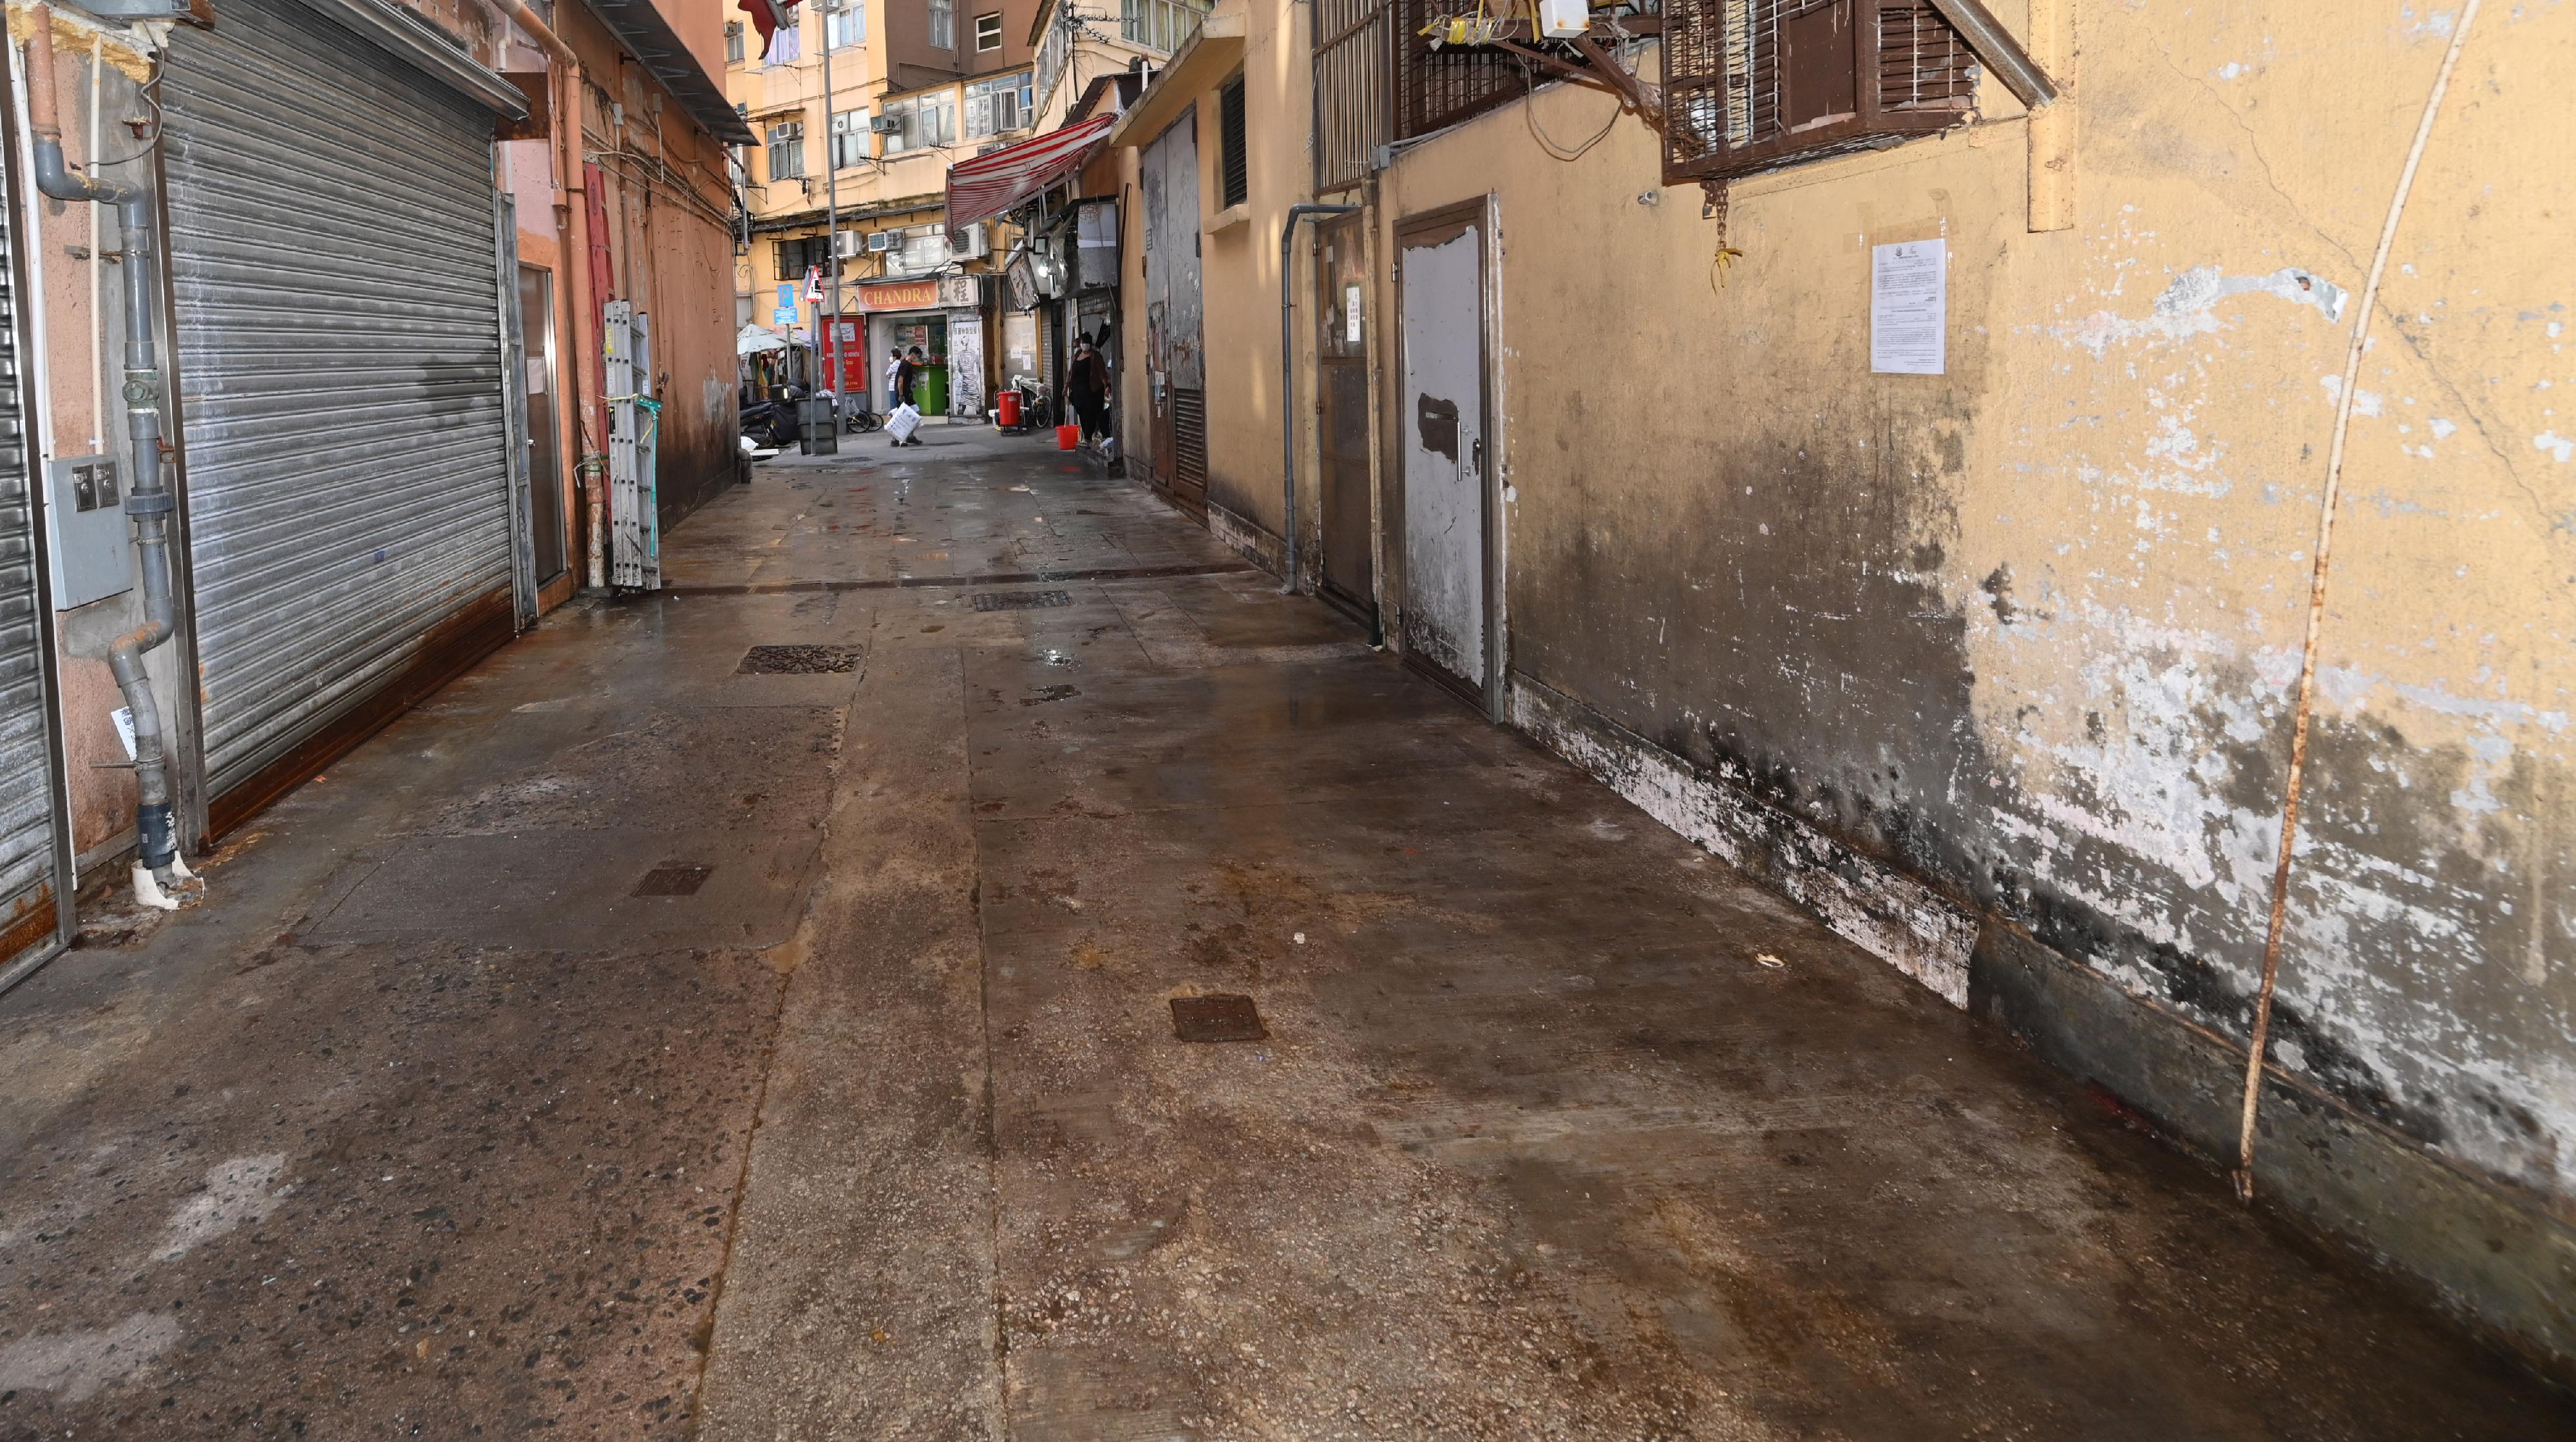 A spokesman for the Food and Environmental Hygiene Department (FEHD) said today (October 17) that the FEHD and the Hong Kong Police Force have conducted a series of stringent enforcement actions against illegal shop front extension activities in various districts since October 3. Photo shows the condition of a street in Tai Po District after a joint operation.
